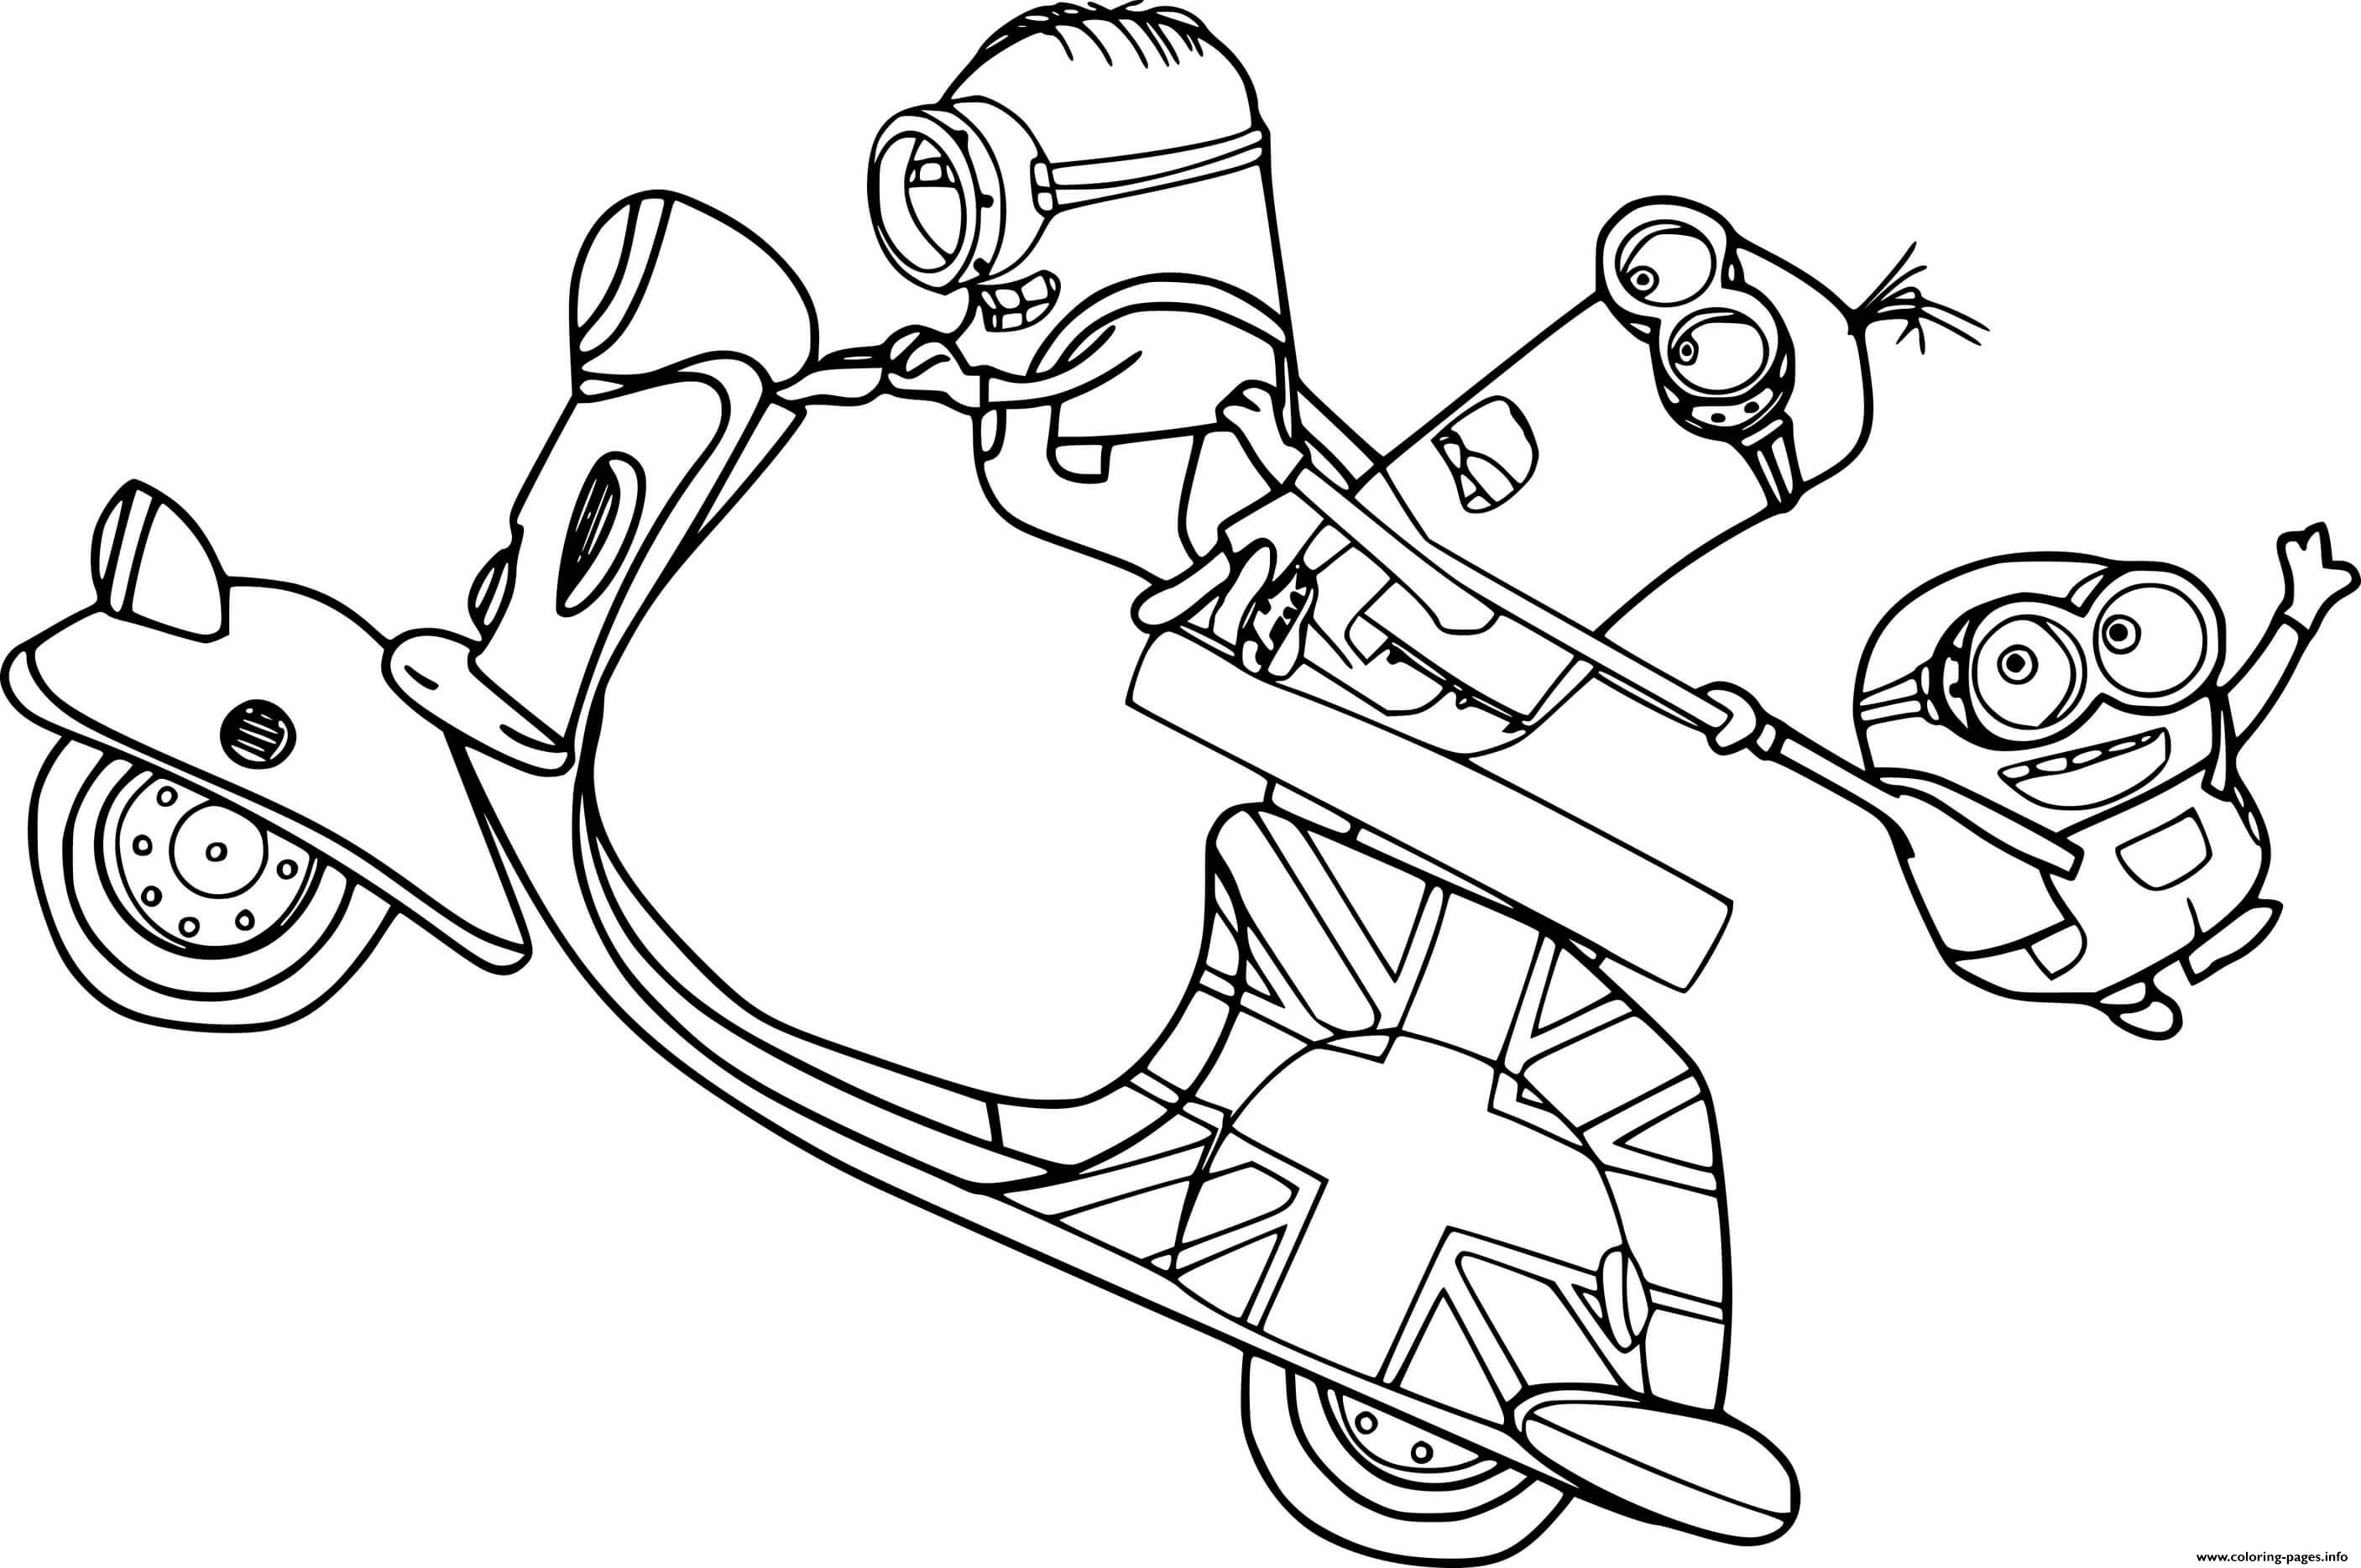 Minions On The Motorcycle coloring